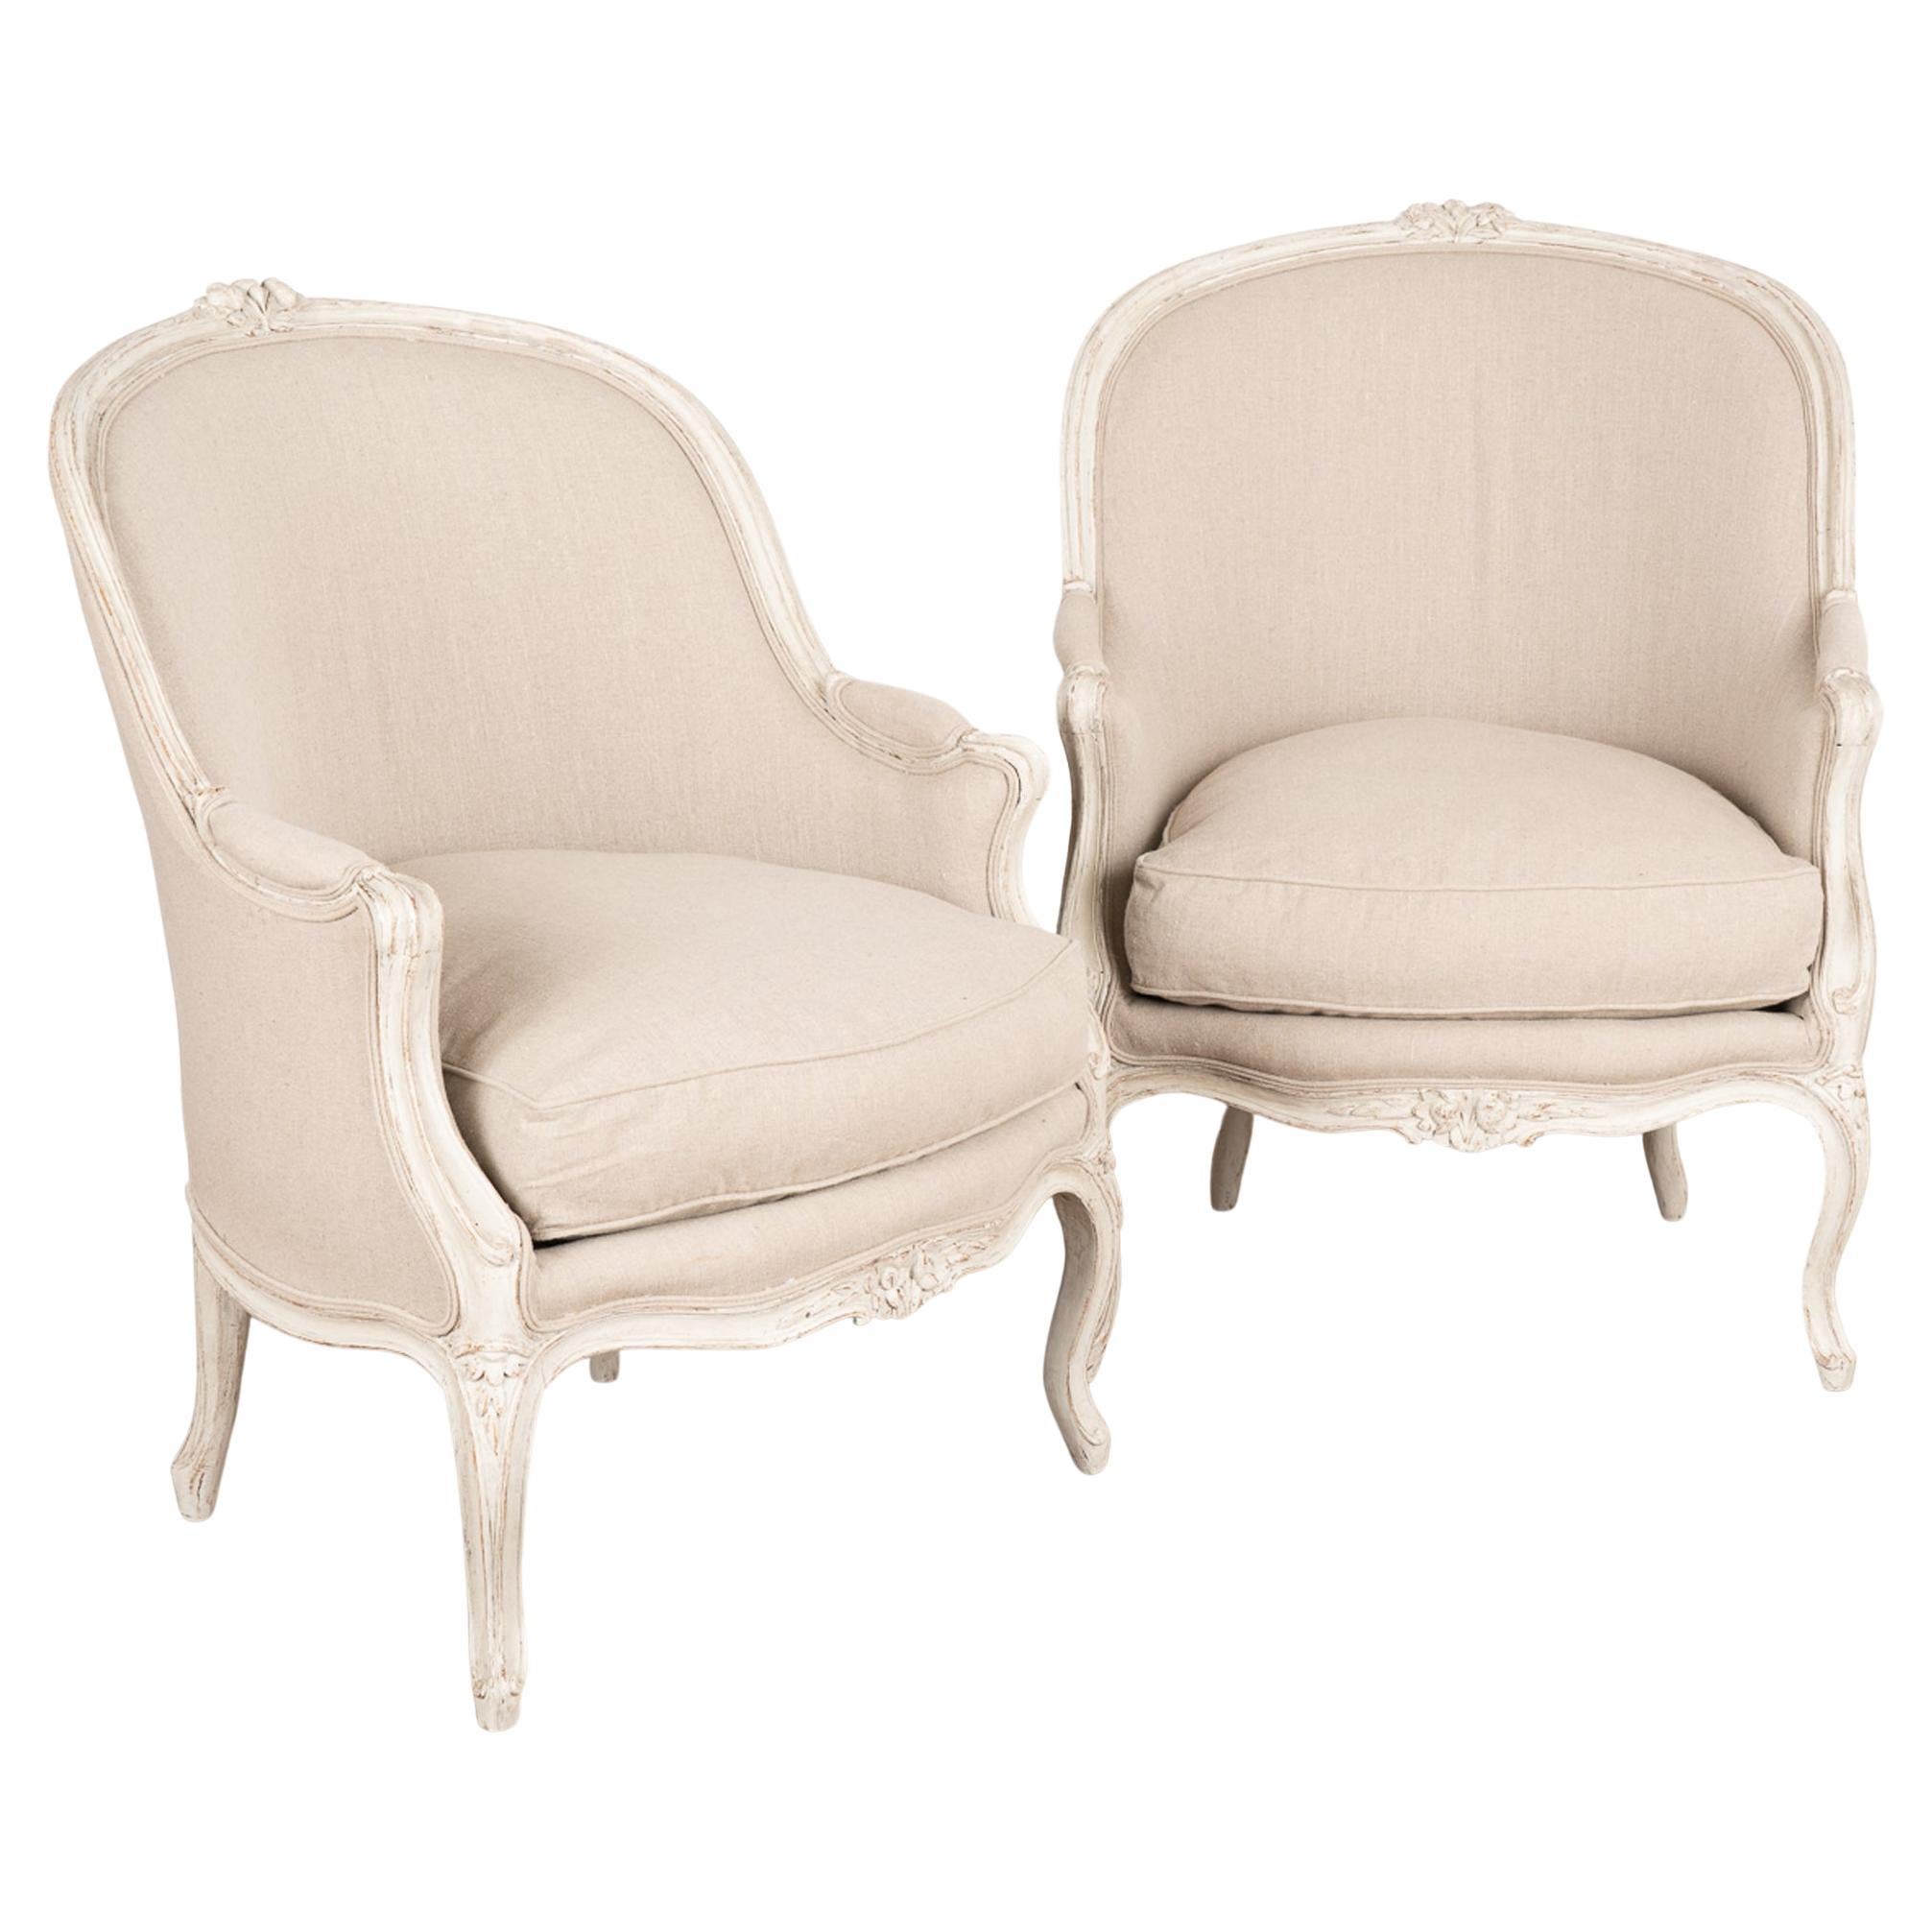 Pair, Gustavian White Painted Arm Chairs, Sweden circa 1880 For Sale